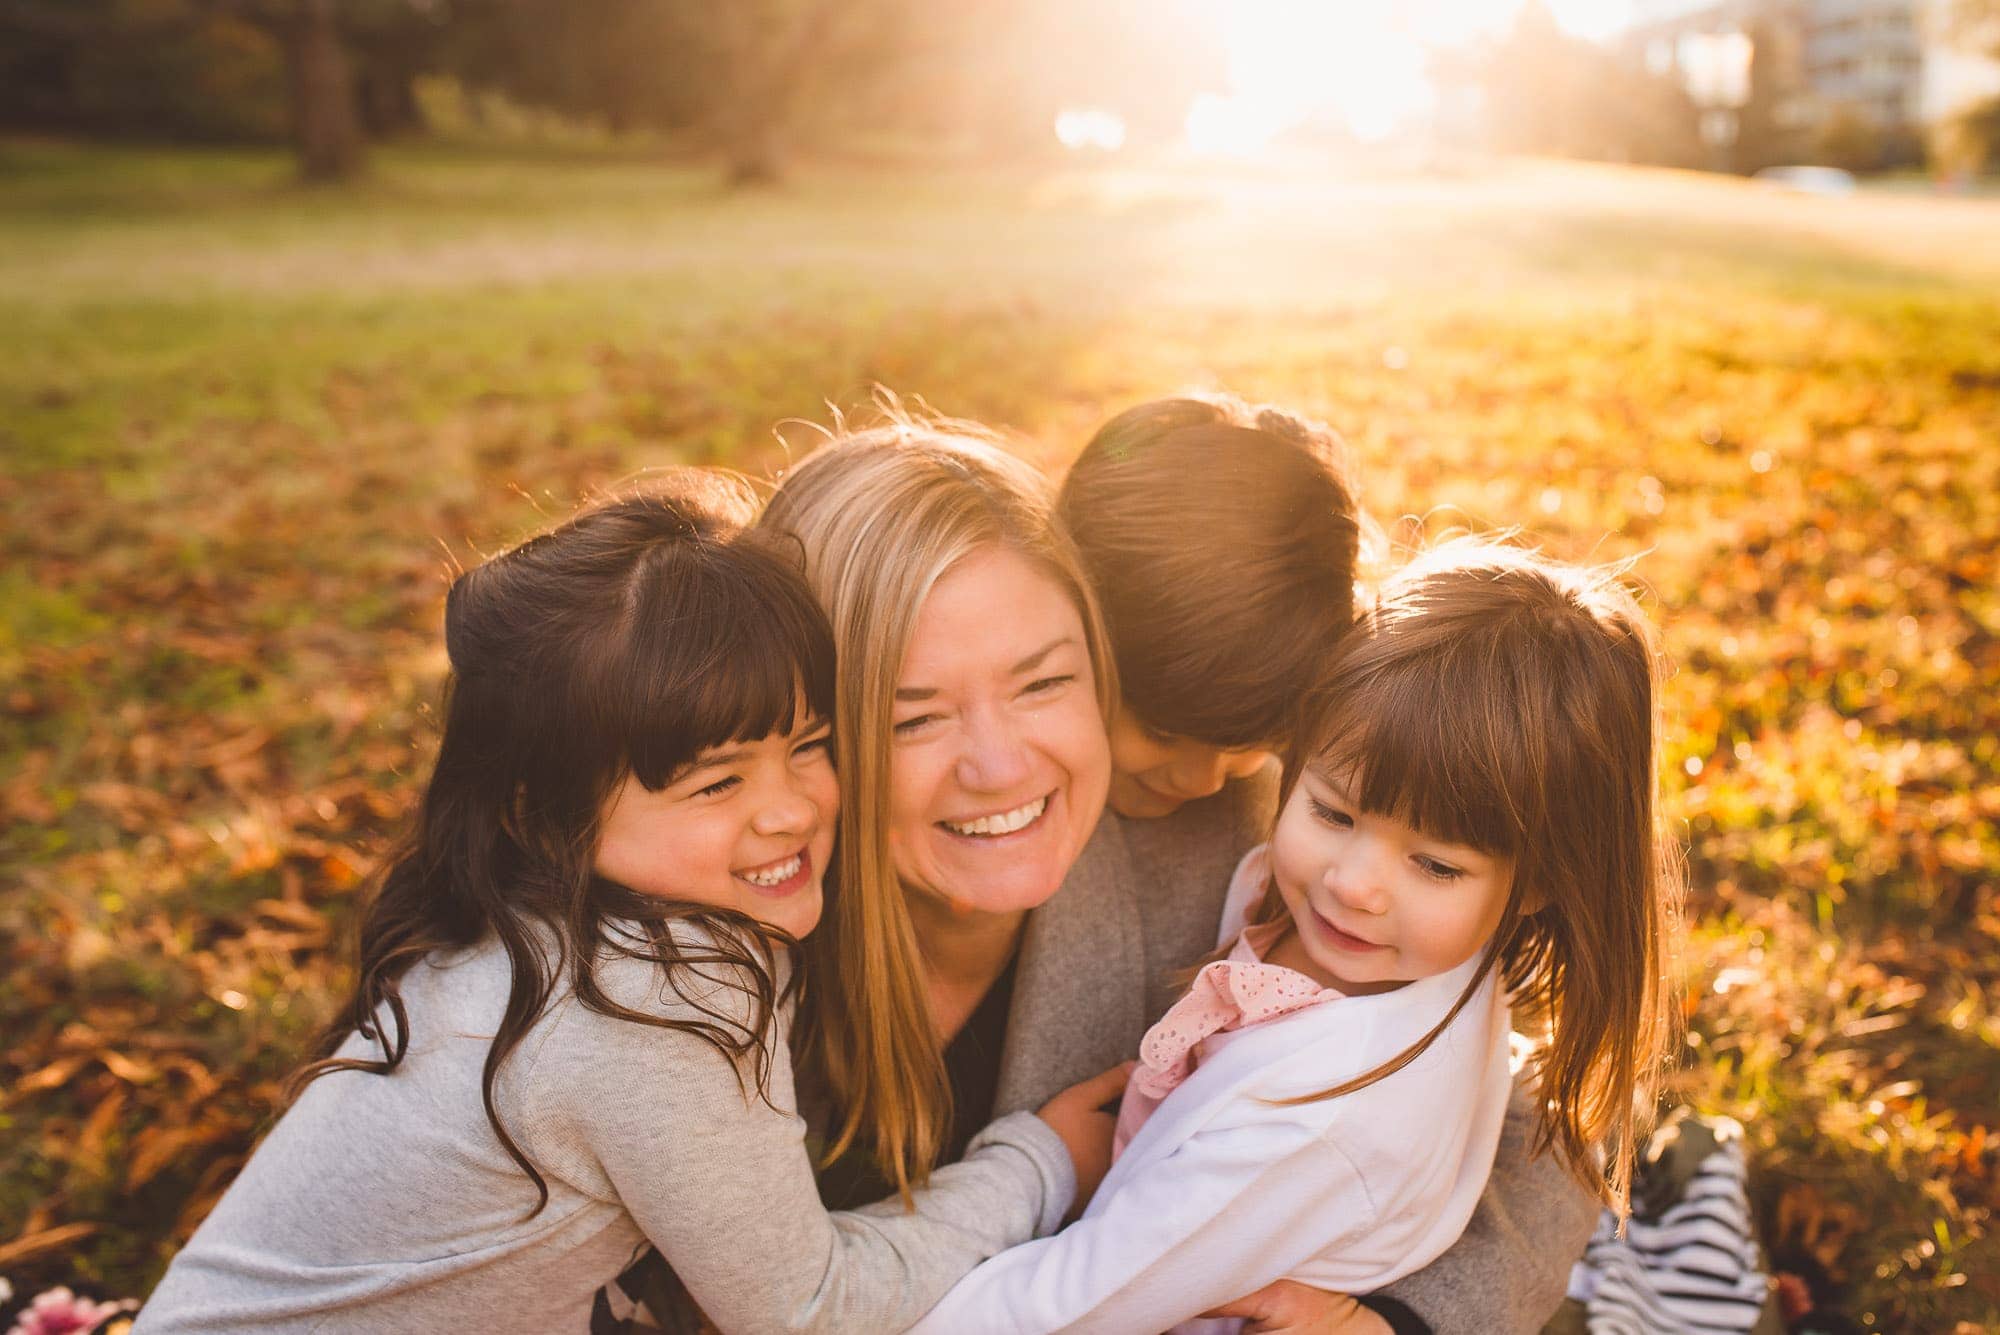 Vancouver Family Photographer captures mom being hugged by all her young kids